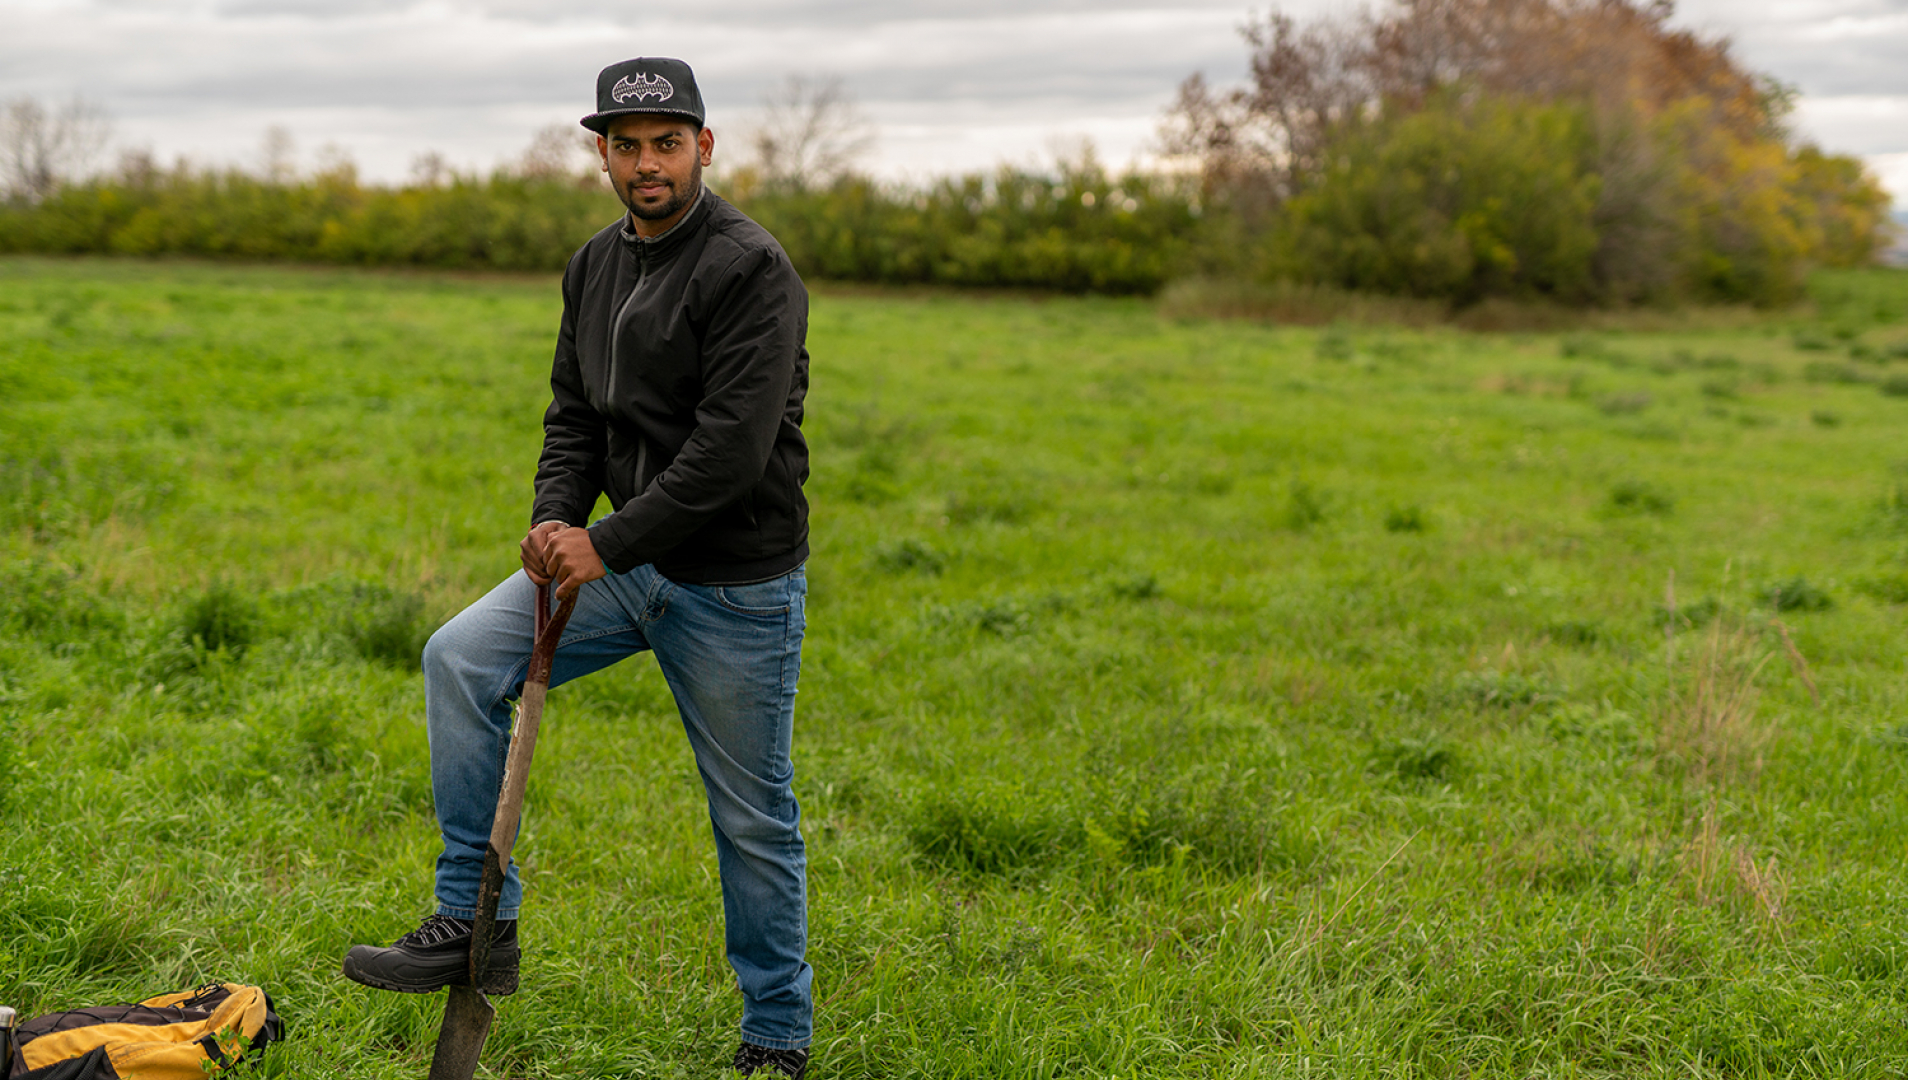 A student stands in a field in the right third of the frame with his foot on a spade digging into the ground.